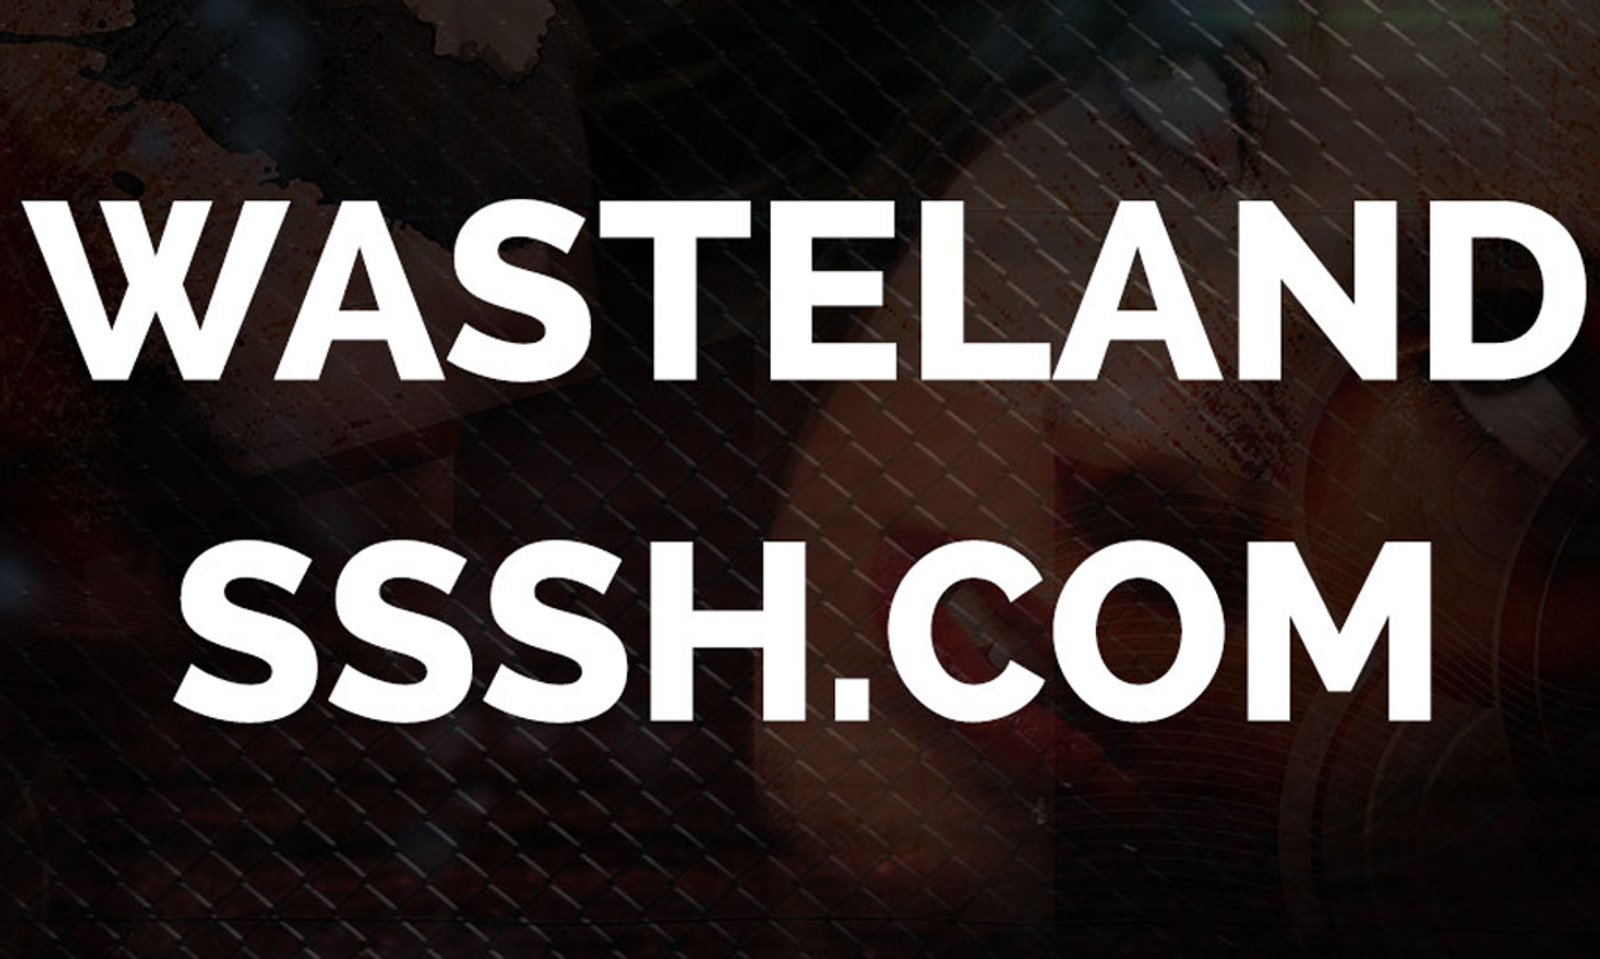 Sssh, Wasteland Boost Adult Performer Payout to 70%